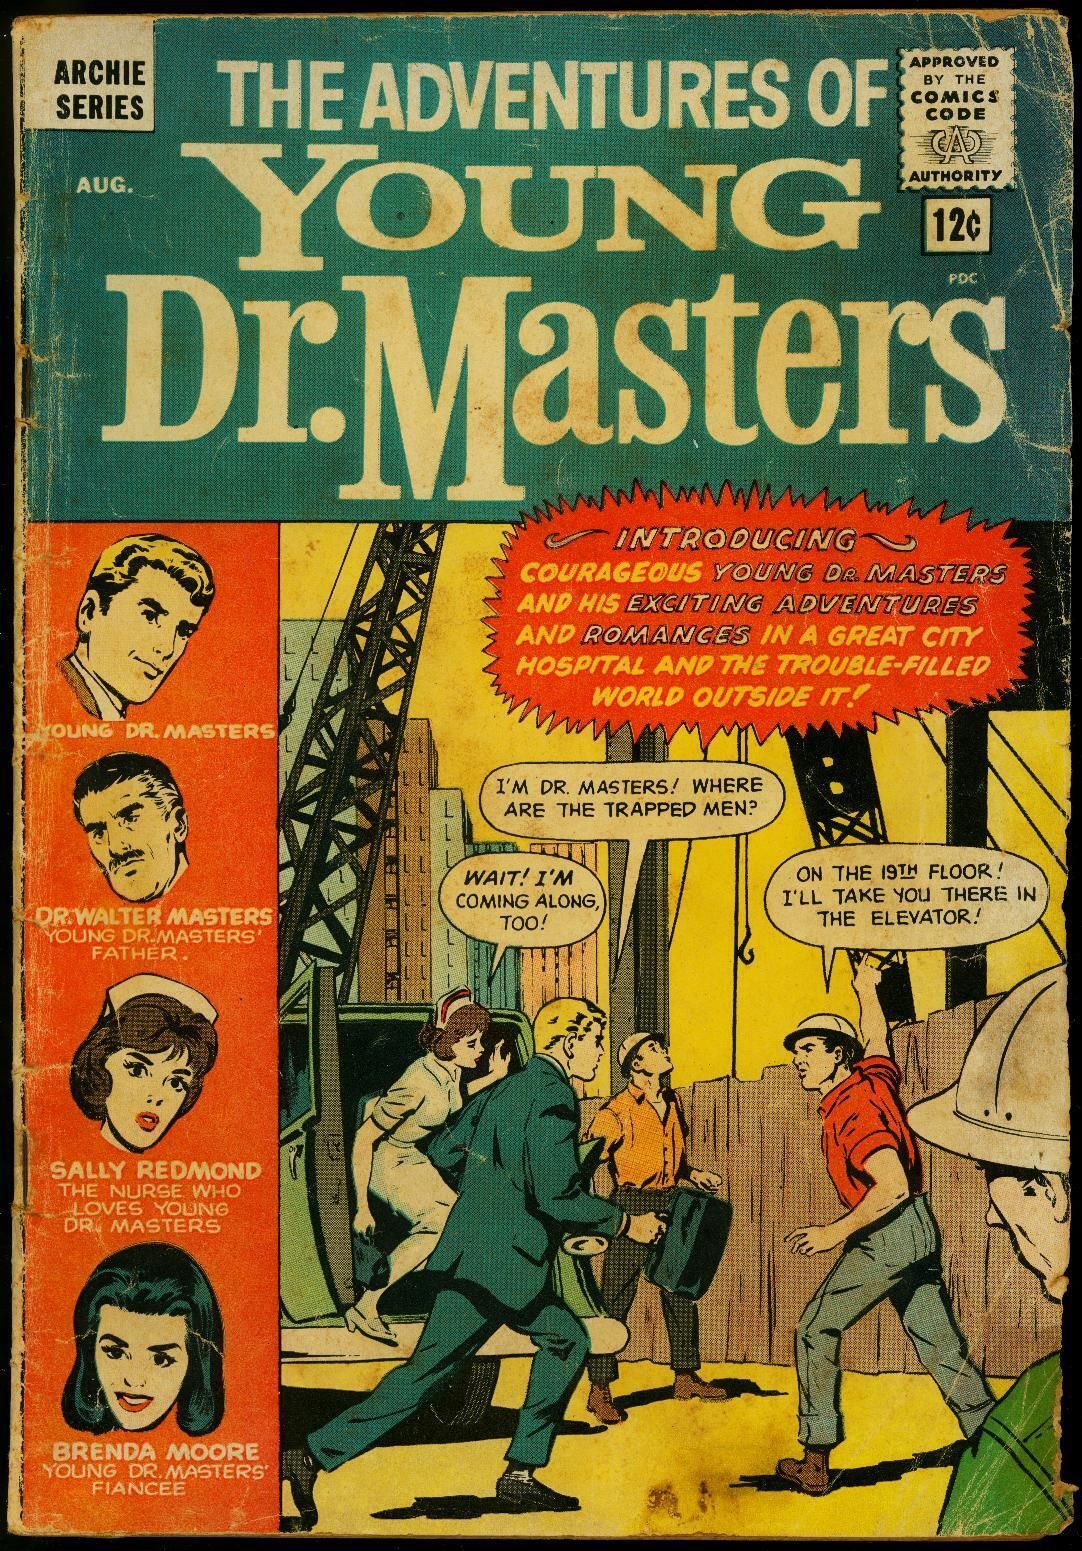 The cover of Young Doctor Masters #1